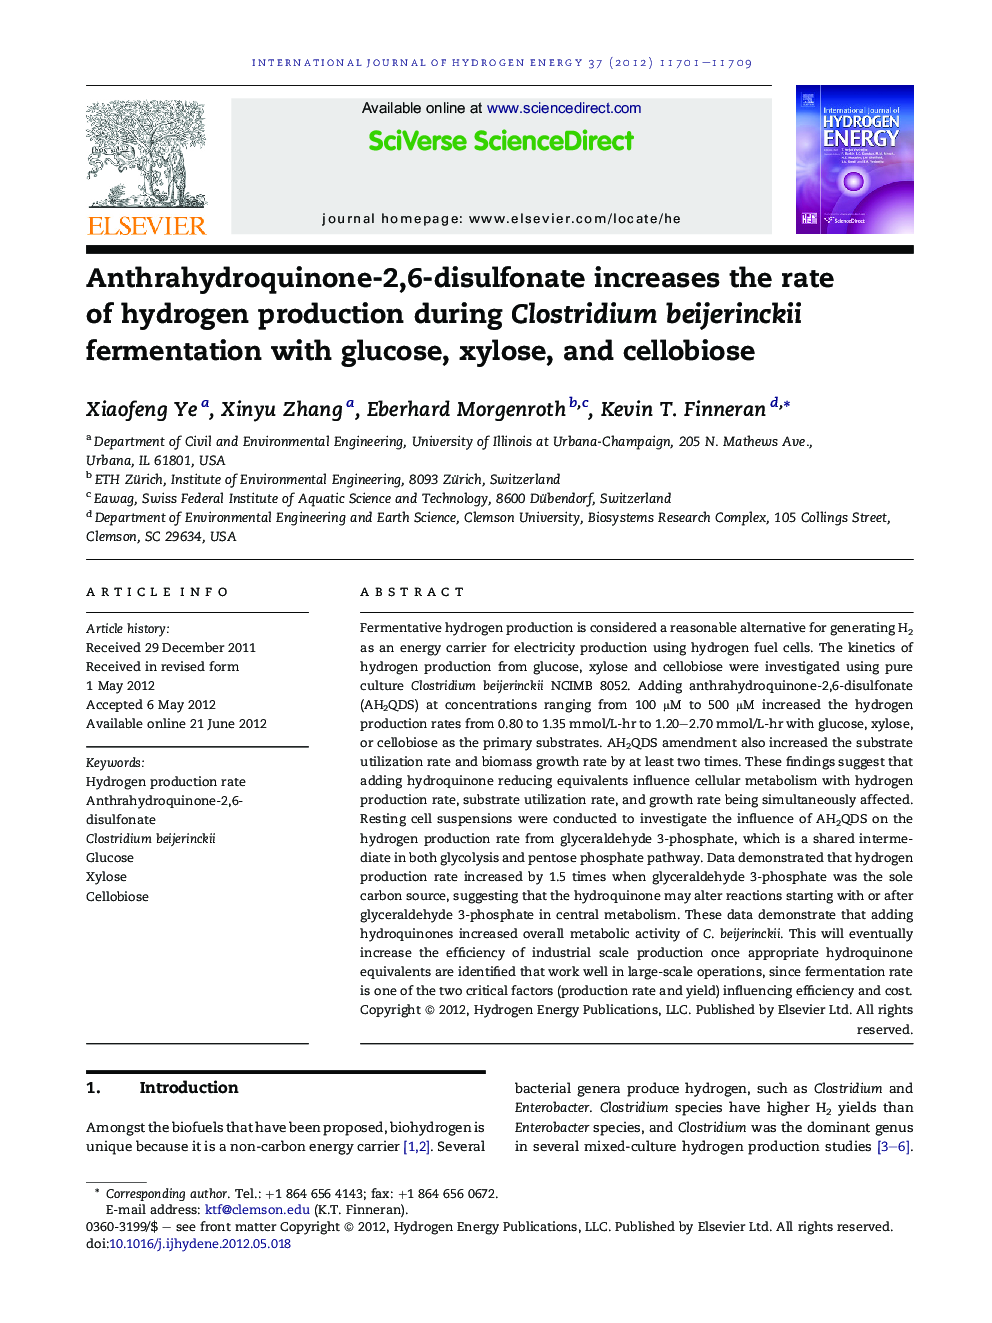 Anthrahydroquinone-2,6-disulfonate increases the rate of hydrogen production during Clostridium beijerinckii fermentation with glucose, xylose, and cellobiose